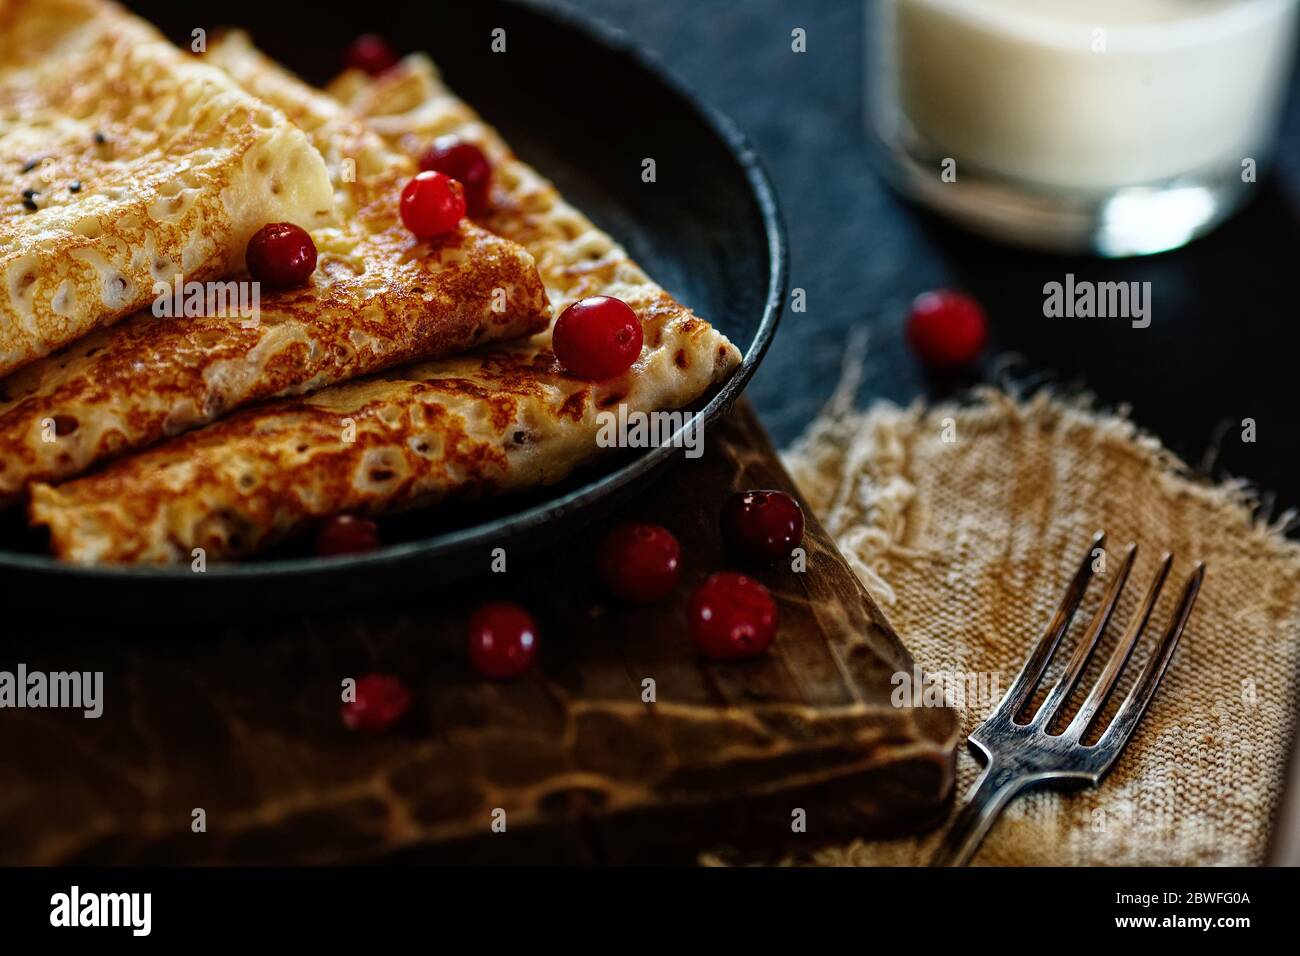 Delicious home-cooked food. Pancakes in a frying pan with cranberry berries and milk. National Russian cuisine. Rustic style Stock Photo